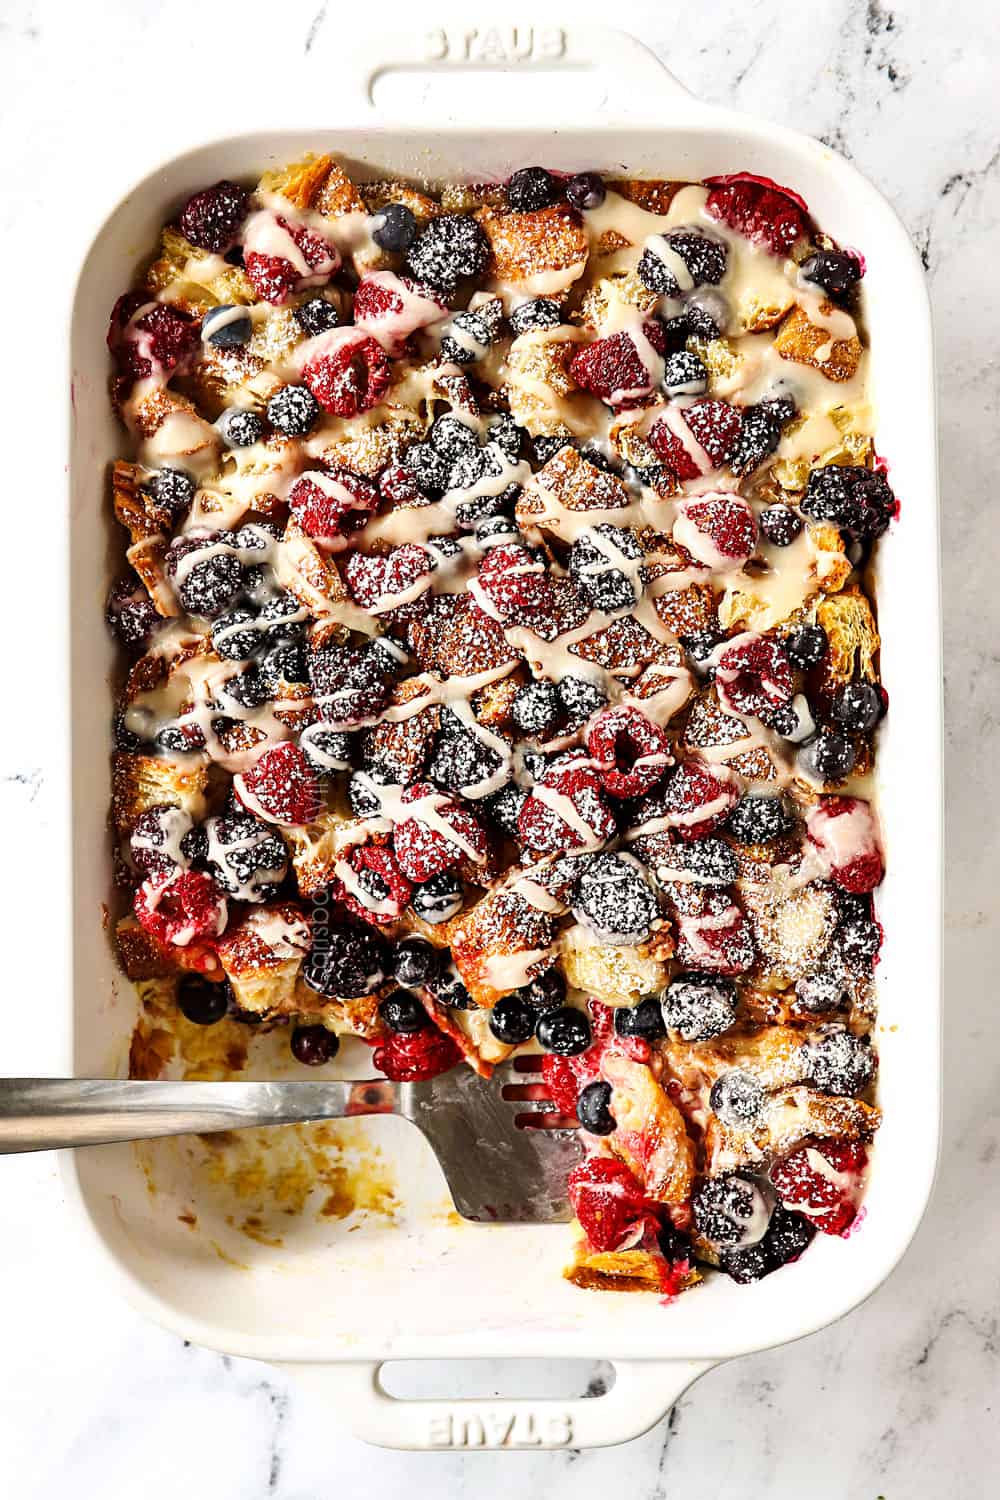 top view of sweet breakfast casserole with croissants, berries and lemon drizzle in a white casserole dish